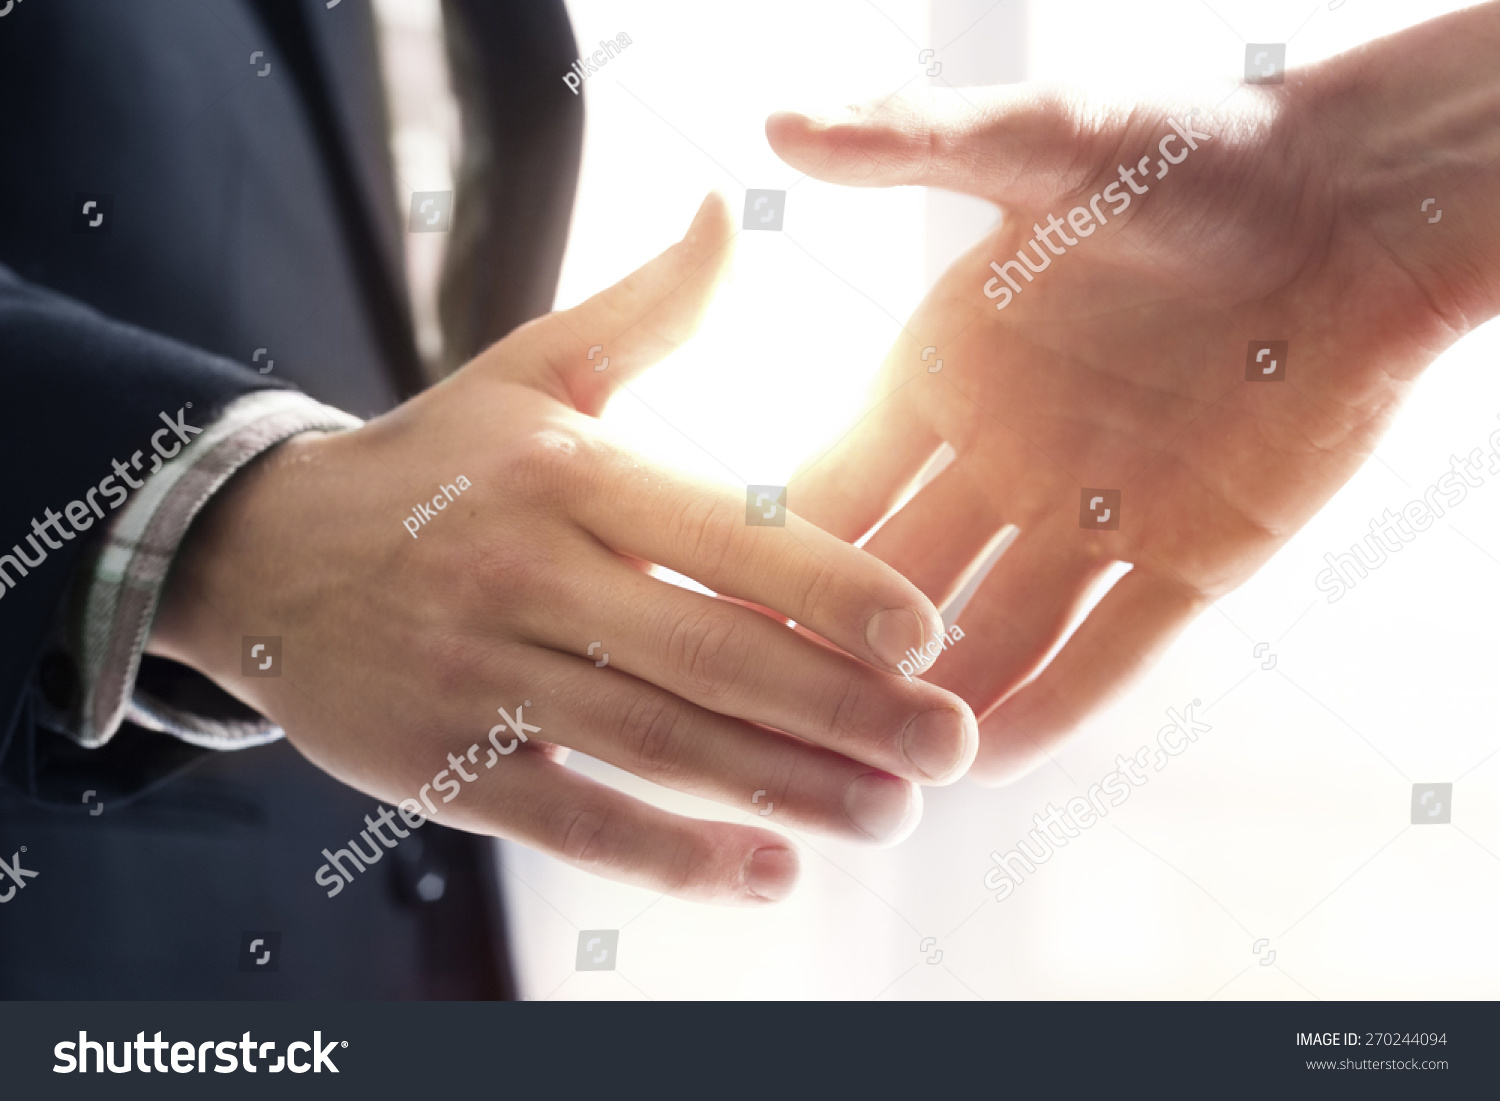 Handshake of Two Businessmen Isolated on White Background Stock Photo - Image of hands, deal ...